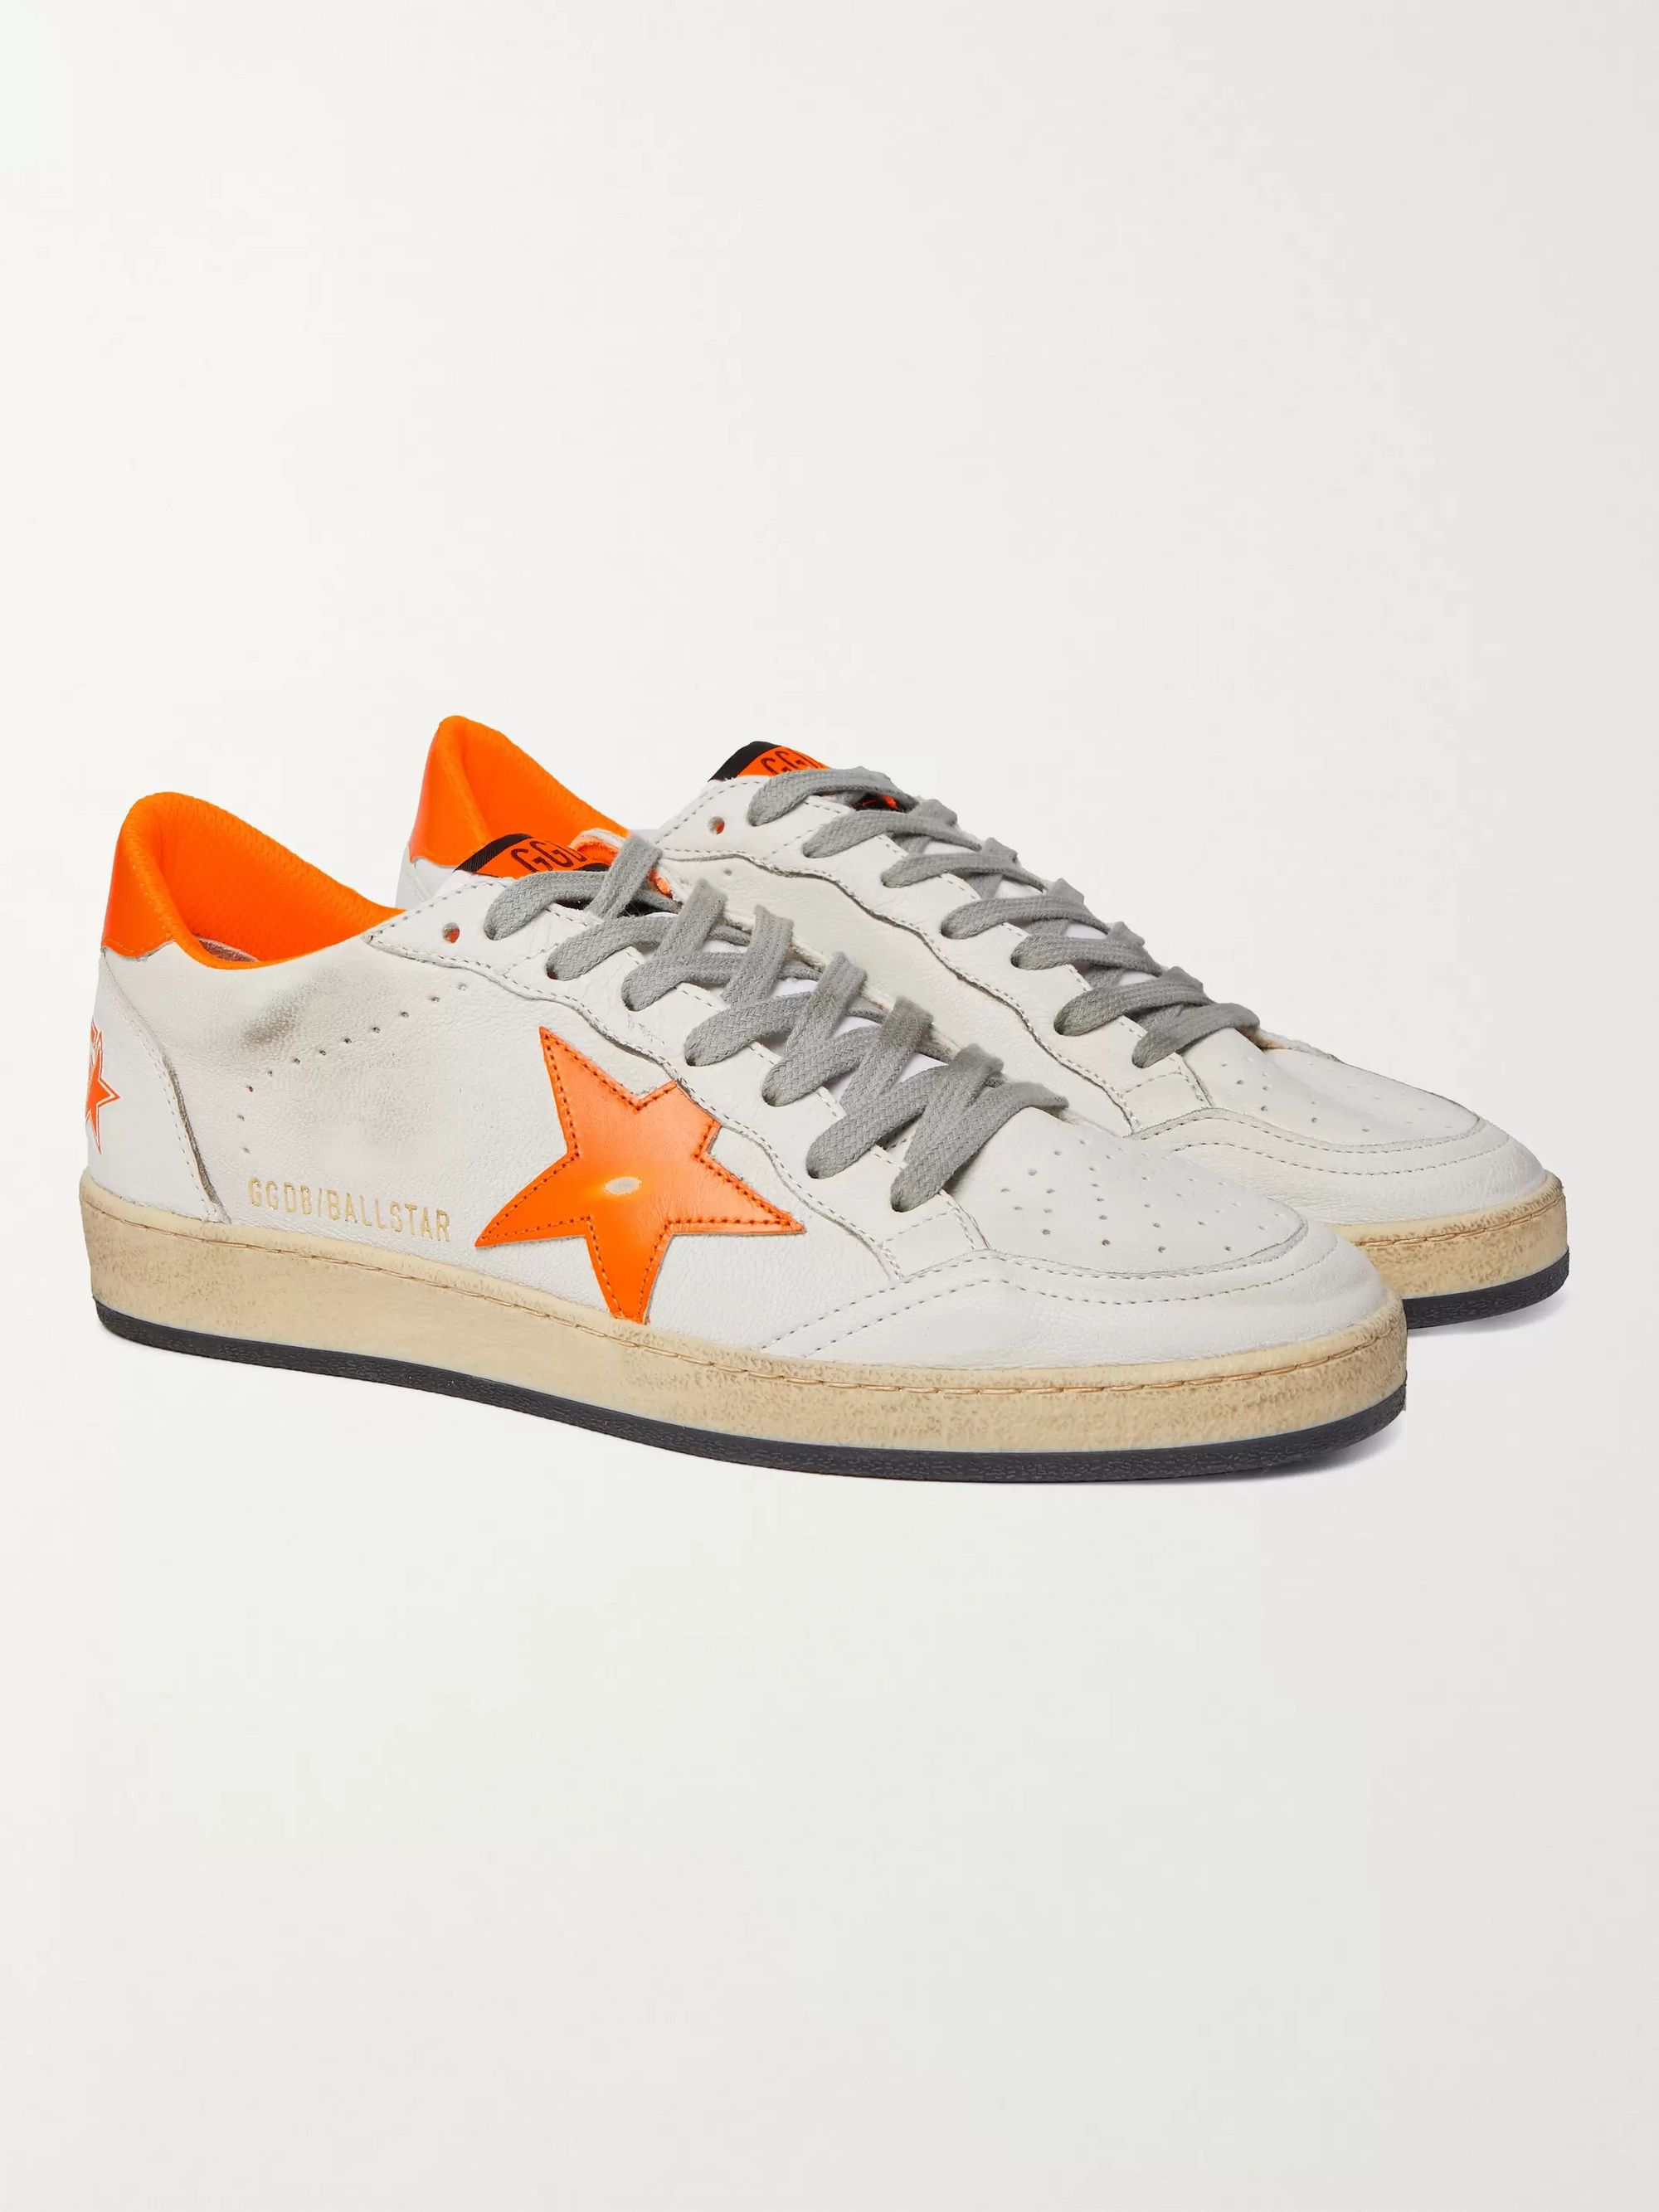 White Ball Star Distressed Leather Sneakers Golden Goose Mr Porter